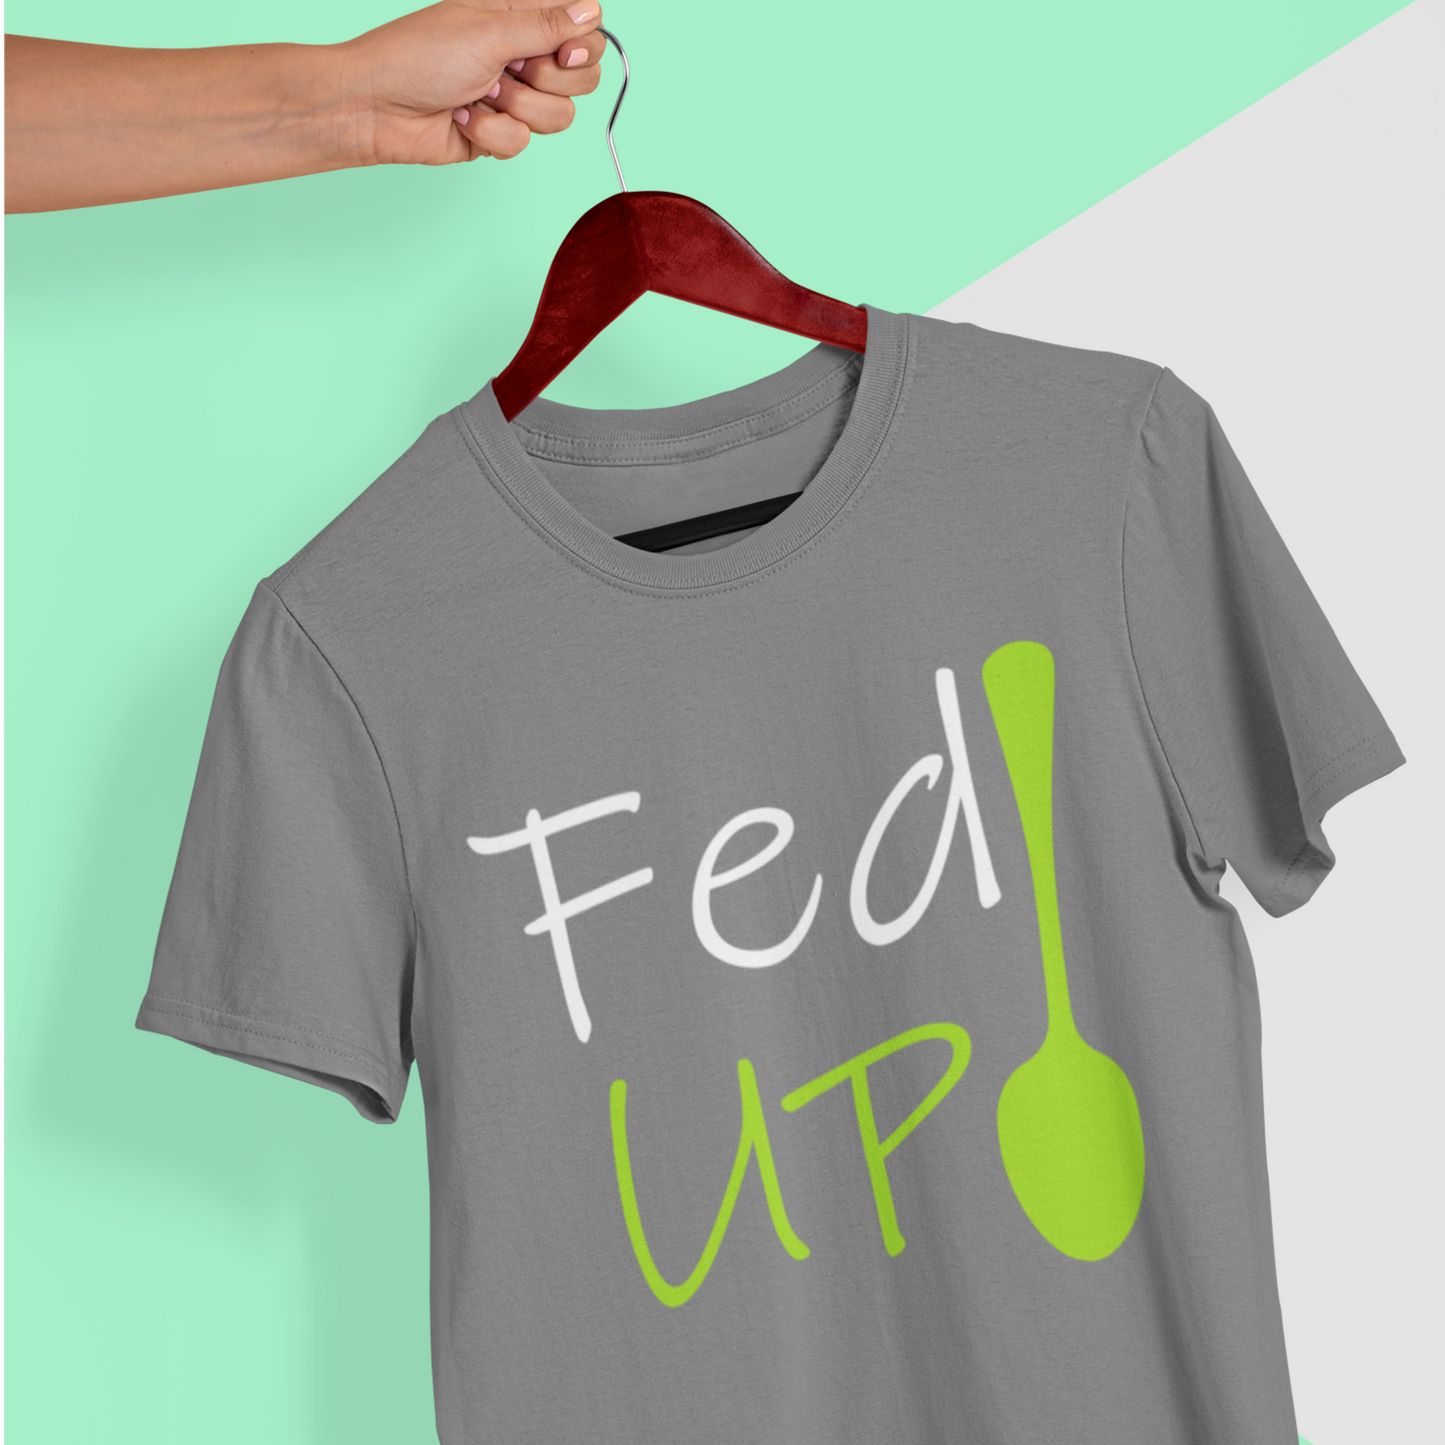 FEDUP FED UP, Funny Unisex Shirt, Sarcasm Lover Shirt, Break Up Shirt, Graphic Tee, Funny Quote Shirt